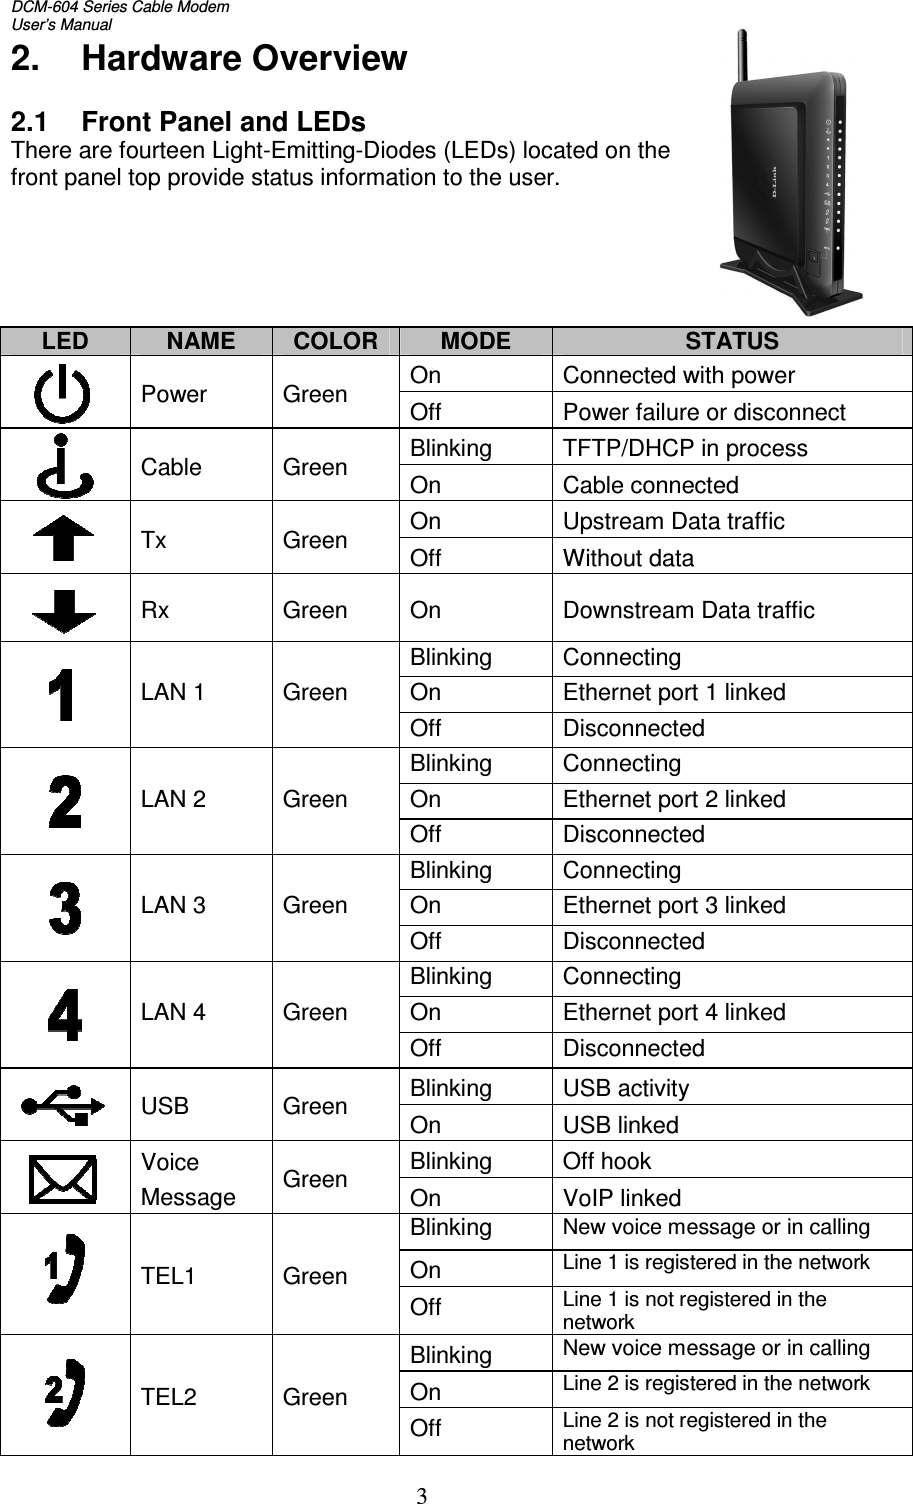 DCM-604 Series Cable Modem  User’s Manual   32.  Hardware Overview  2.1  Front Panel and LEDs There are fourteen Light-Emitting-Diodes (LEDs) located on the  front panel top provide status information to the user.      LED NAME COLOR MODE STATUS  Power  Green  On  Connected with power   Off  Power failure or disconnect  Cable  Green  Blinking  TFTP/DHCP in process   On  Cable connected  Tx  Green  On  Upstream Data traffic   Off  Without data  Rx  Green  On  Downstream Data traffic  LAN 1  Green Blinking  Connecting On  Ethernet port 1 linked  Off   Disconnected  LAN 2  Green Blinking  Connecting On  Ethernet port 2 linked  Off   Disconnected  LAN 3  Green Blinking  Connecting On  Ethernet port 3 linked  Off   Disconnected  LAN 4  Green Blinking  Connecting On  Ethernet port 4 linked  Off   Disconnected   USB  Green  Blinking  USB activity On  USB linked  Voice Message  Green  Blinking  Off hook   On   VoIP linked  TEL1  Green Blinking New voice message or in calling  On  Line 1 is registered in the network Off  Line 1 is not registered in the network  TEL2  Green Blinking  New voice message or in calling   On  Line 2 is registered in the network Off  Line 2 is not registered in the network 